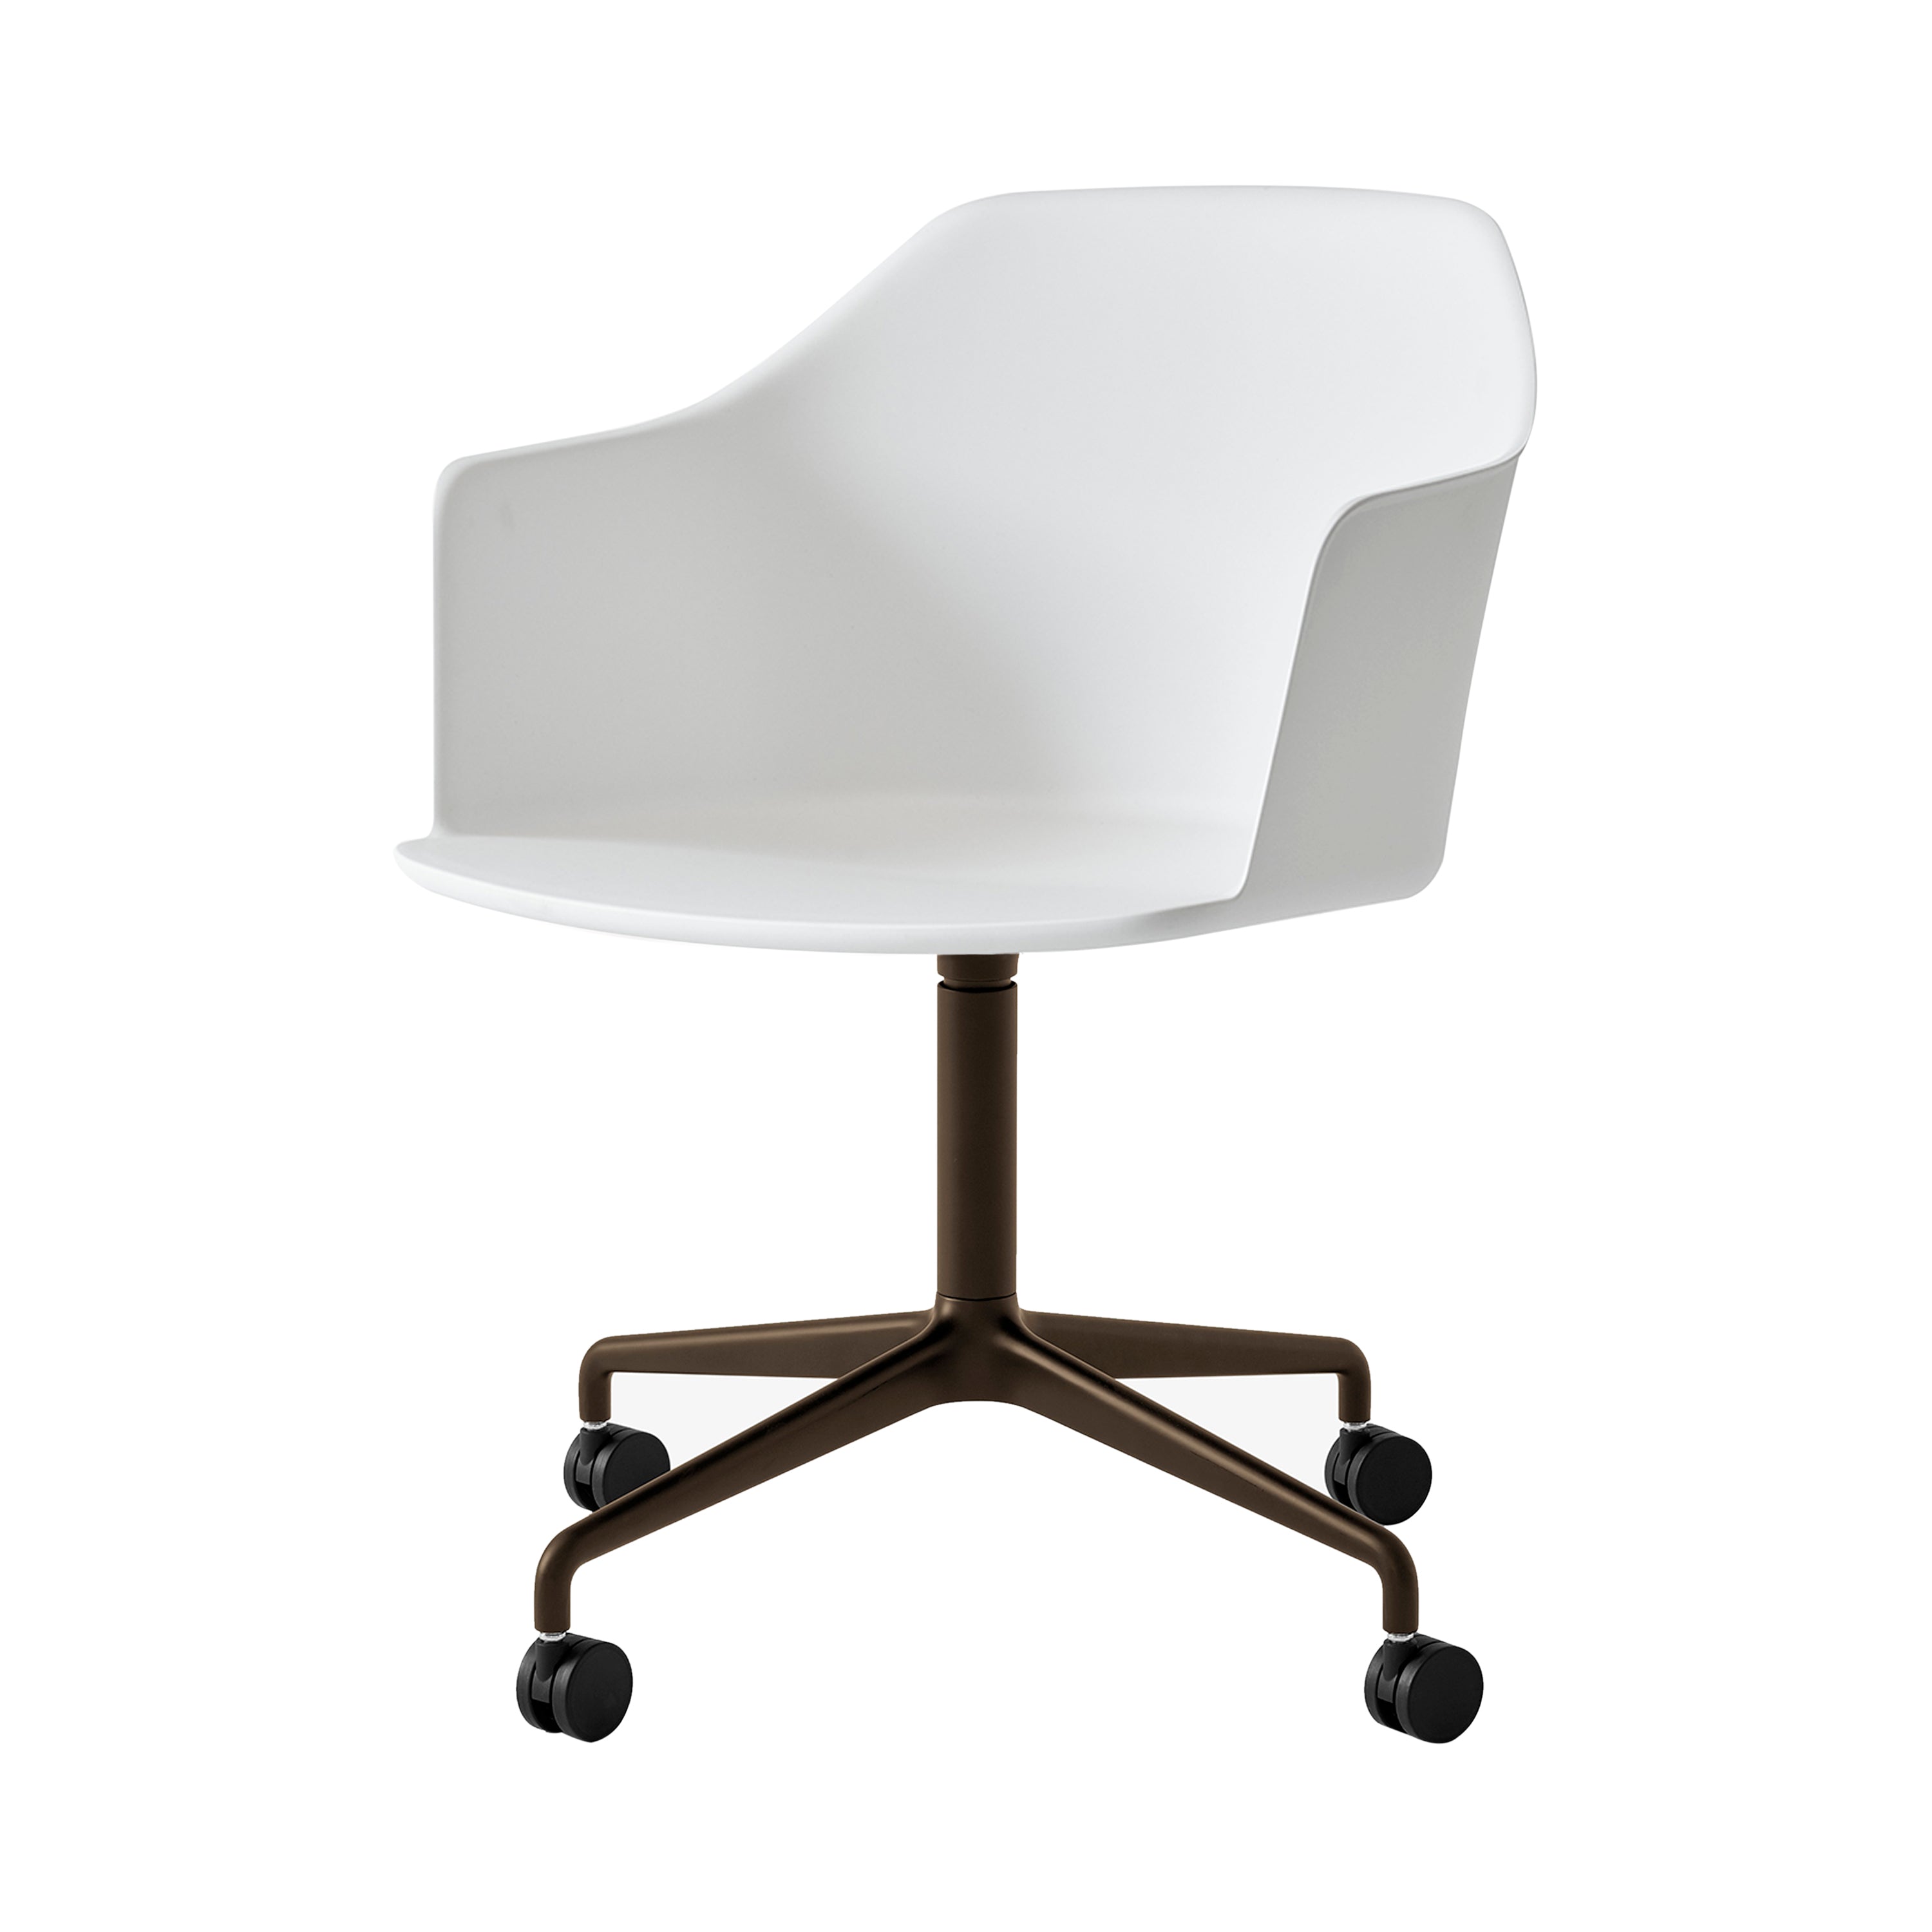 Rely Chair HW48: White + Bronzed